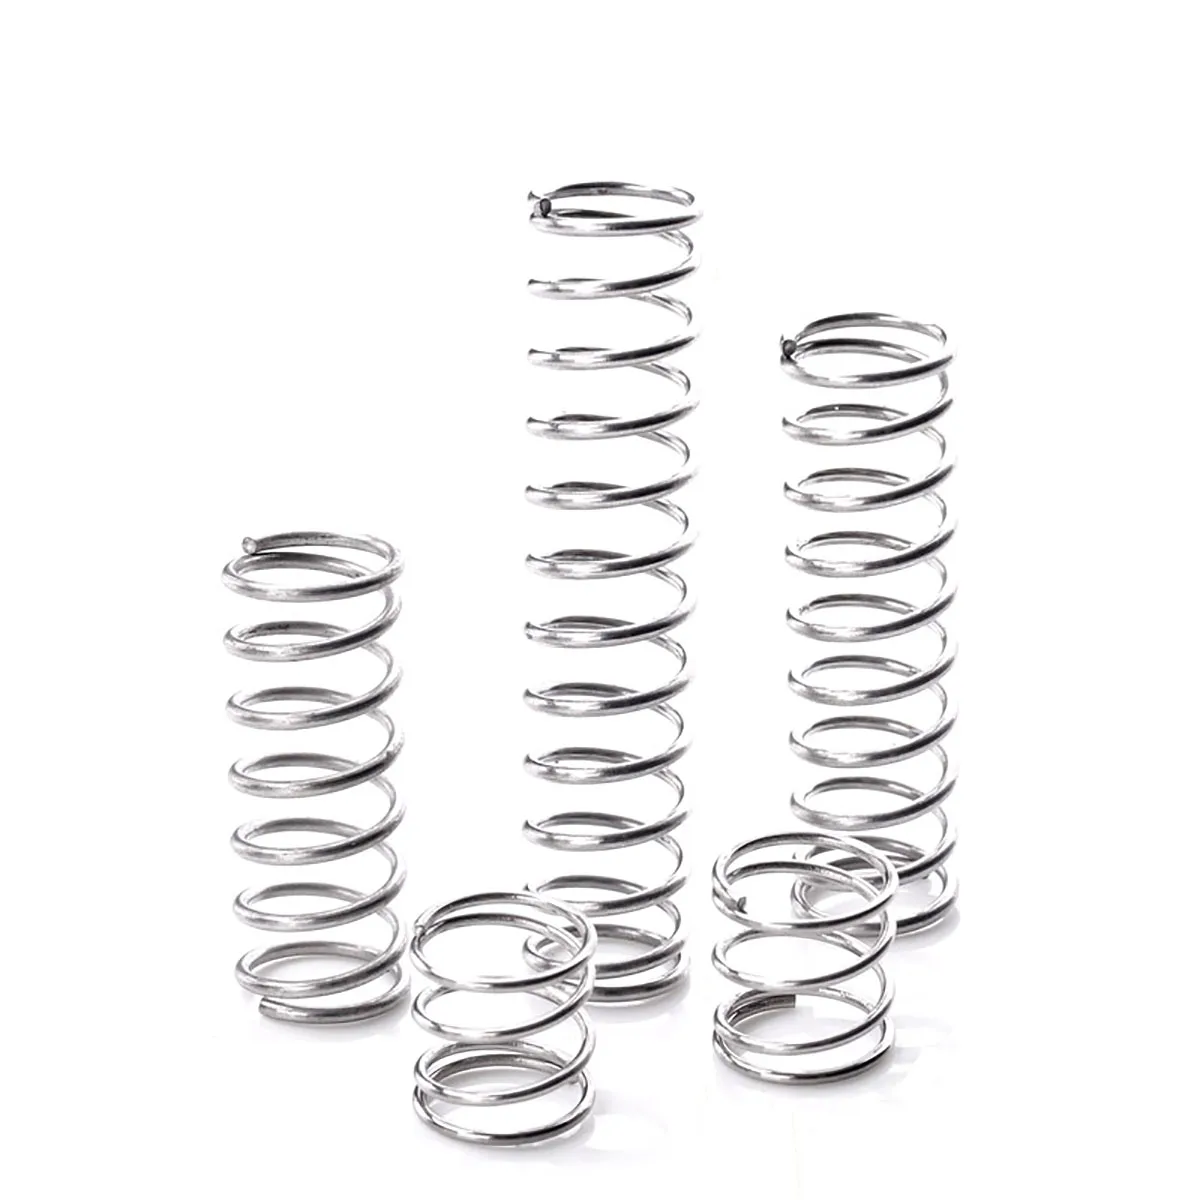 10Pc Zinc Plated Steel Compression Spring Wire Dia 0.8mm Y-Type Rotor Return Spring Pressure Spring OD 7mm-11mm  Length 10-100mm